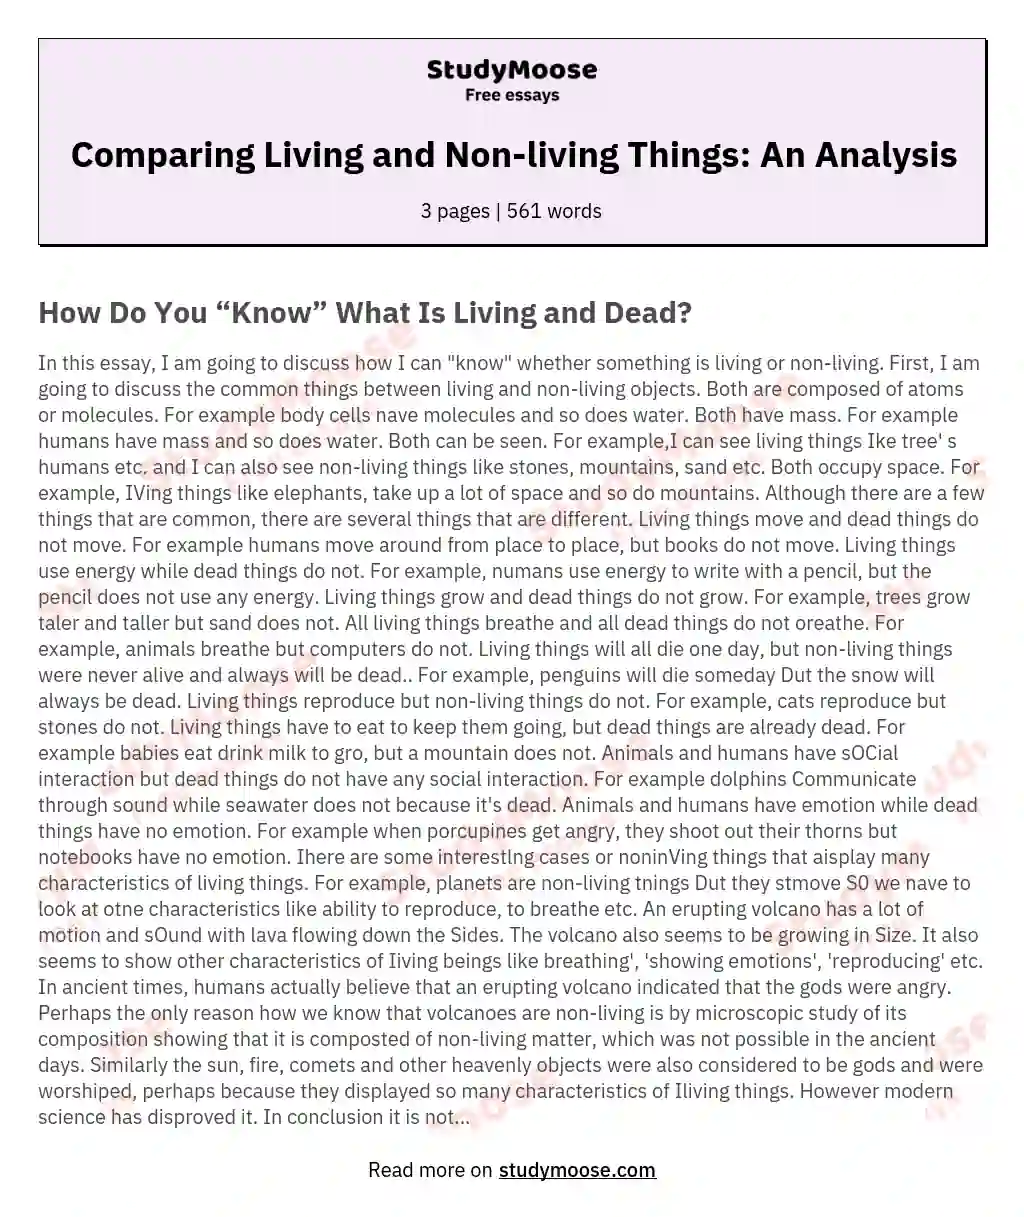 Comparing Living and Non-living Things: An Analysis essay